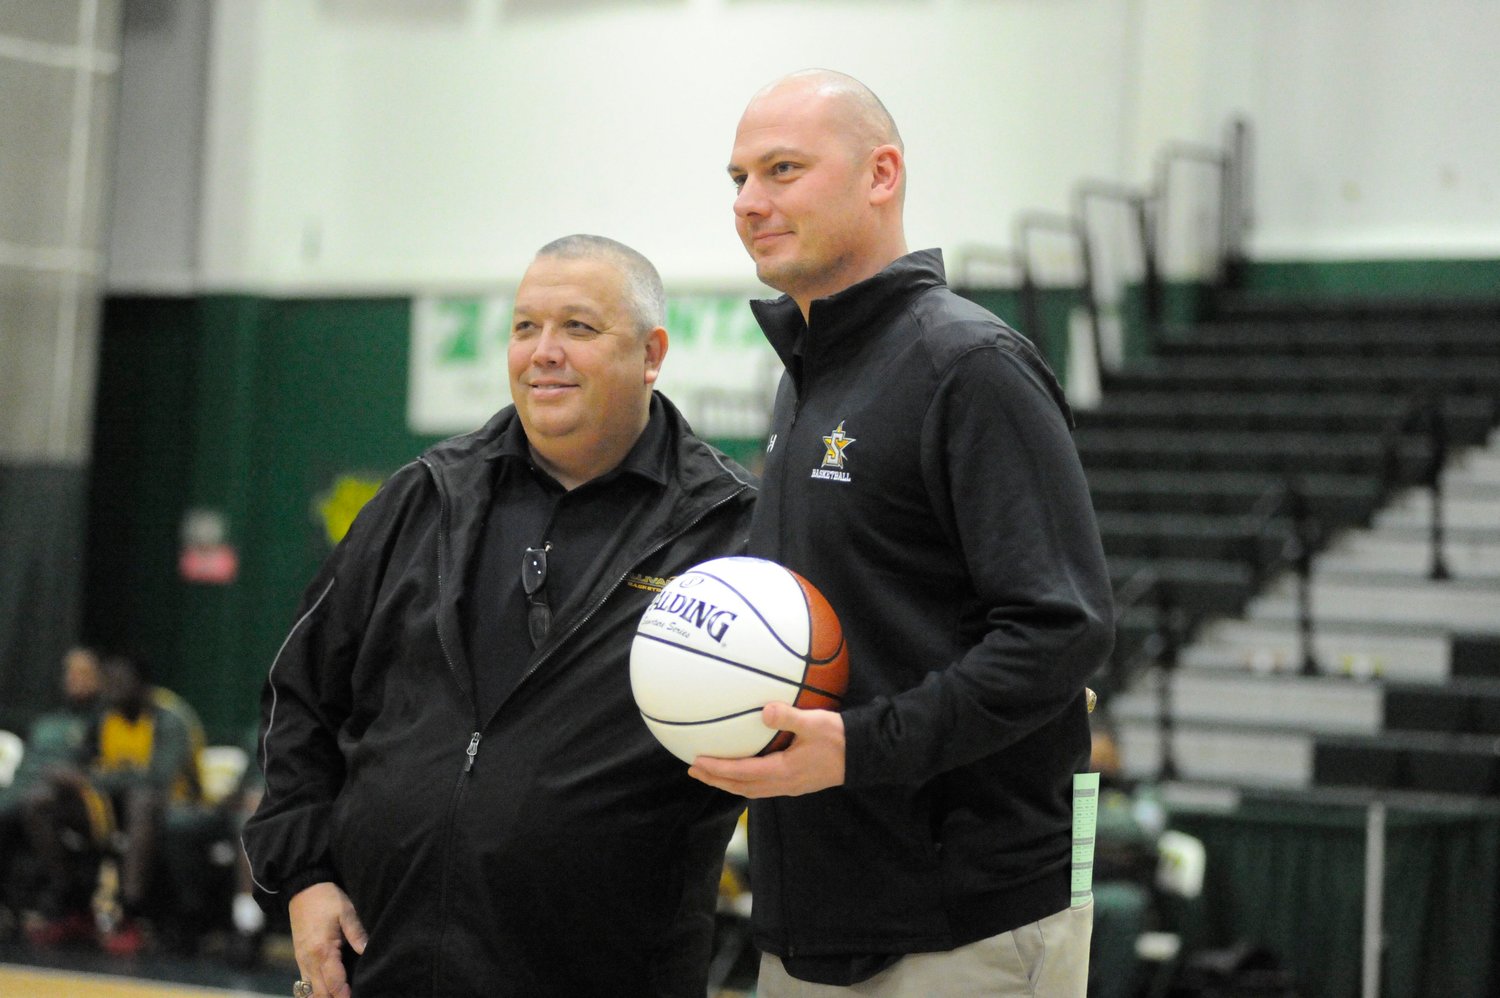 Passing the torch of success. Chris DePew, SUNY Sullivan’s athletic director and former head coach, posted 186 wins with the Generals, including a national championship in 2007. Current men’s basketball coach Brent Wilson broke that 13-year record on February 10 with his 187th victory at SUNY Sullivan. For more information and a review of the Generals’ 2021-2022 season of hoops, visit https://www.riverreporter.com/sports.